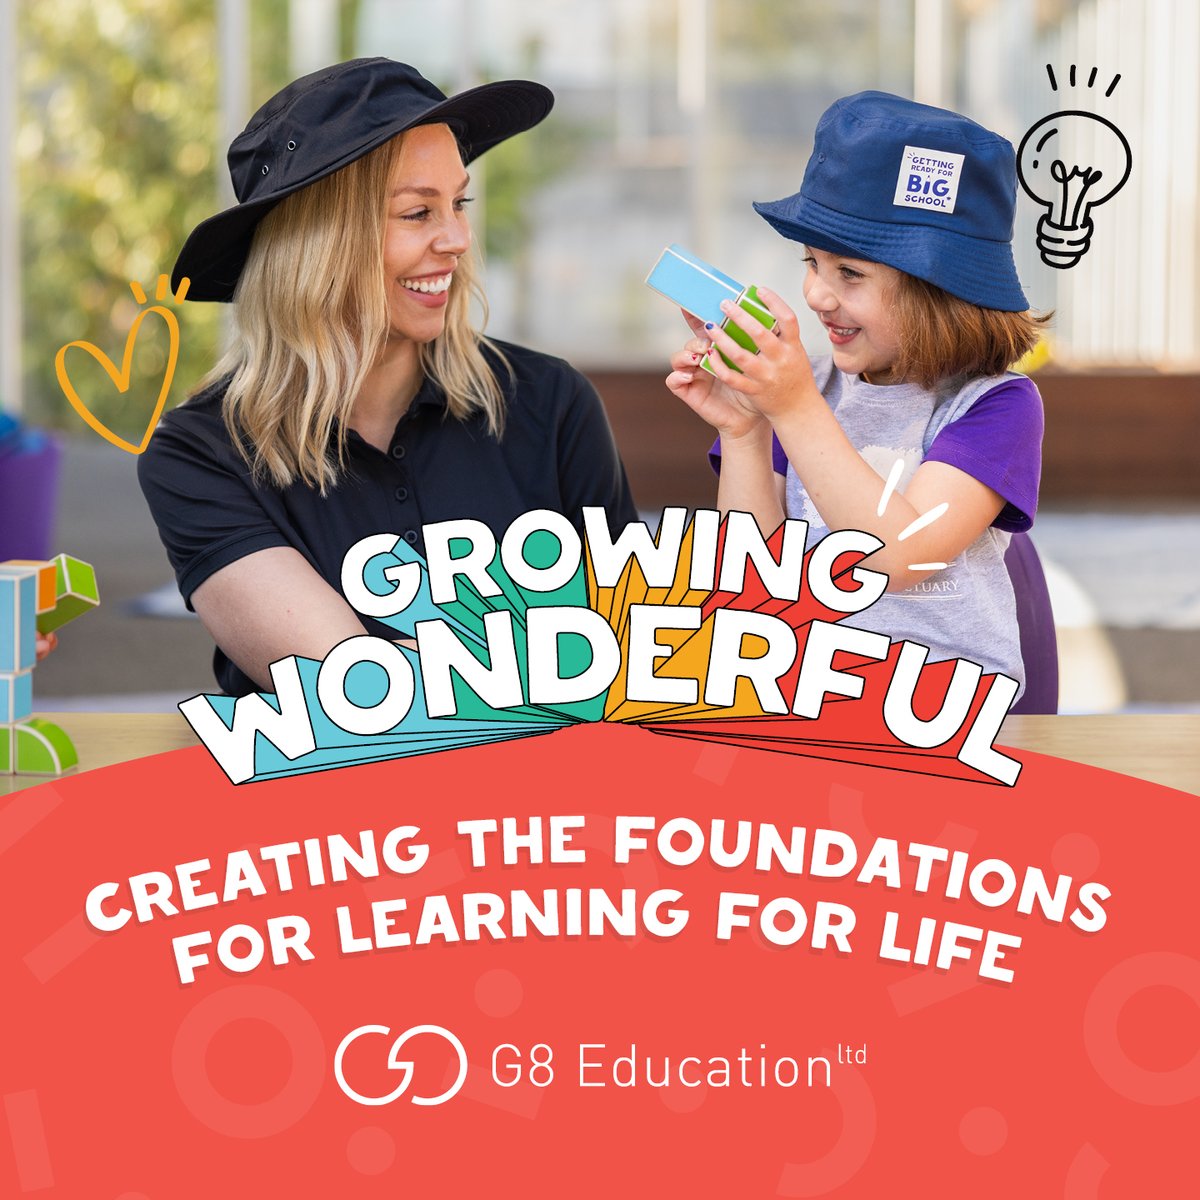 A big thank you to G8 Education for their sponsorship with the Australian Institute for Intergenerational Practice Symposium for 2024! G8 Educations’ support helped make the event a success, and we are grateful for their support g8education.edu.au